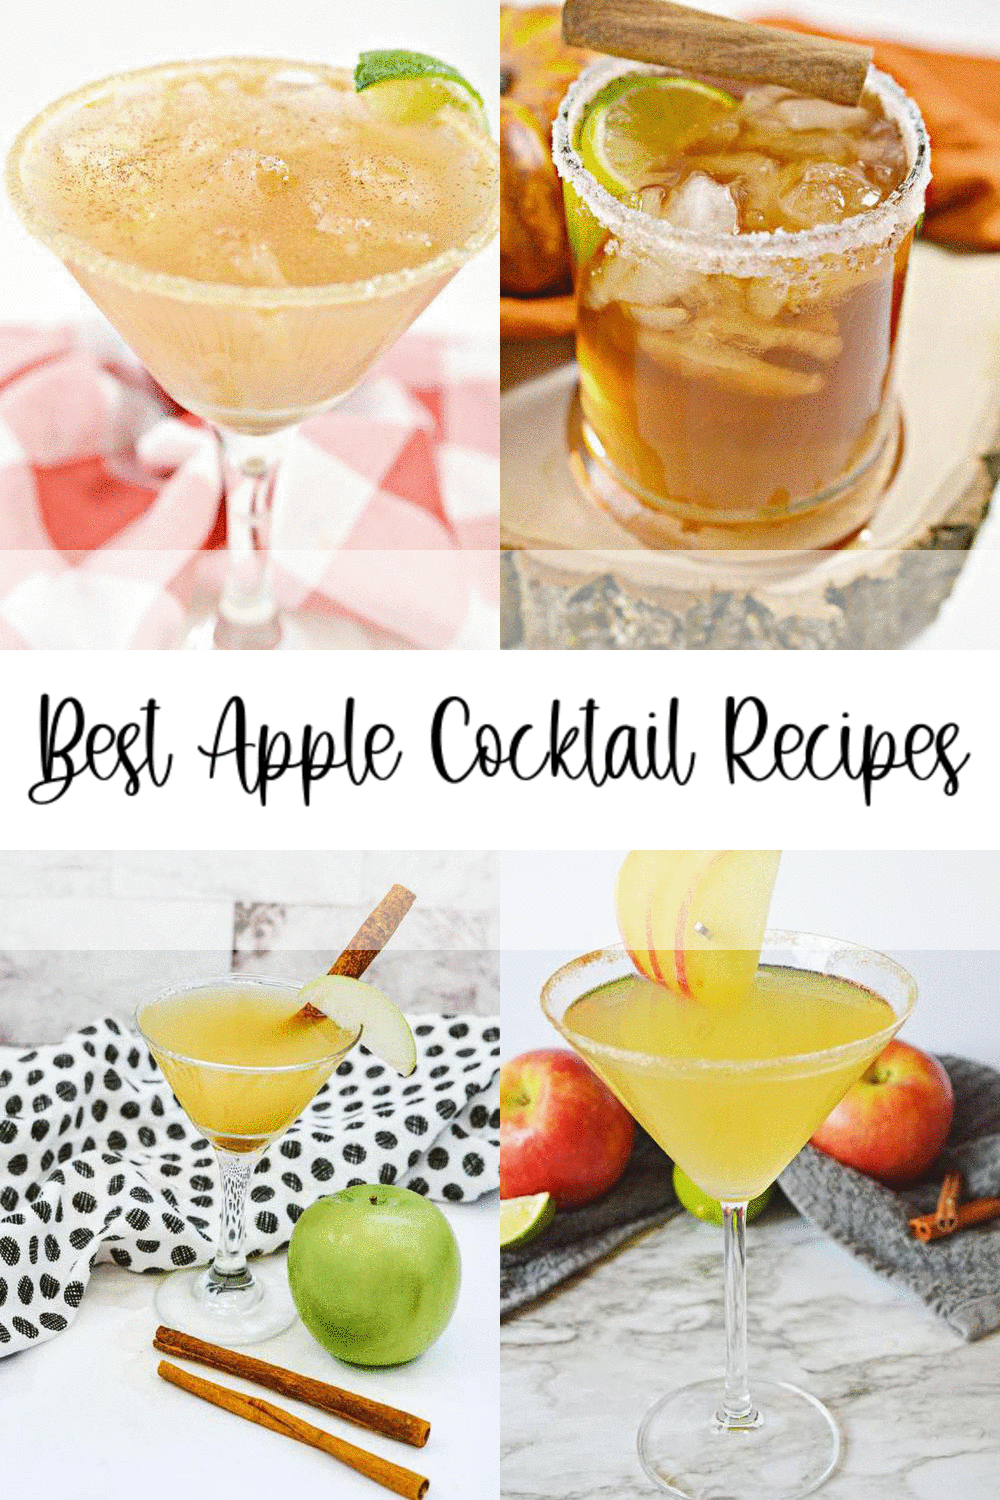 8 Apple Cocktail Recipes - Best Apple Mixed Drinks Ideas